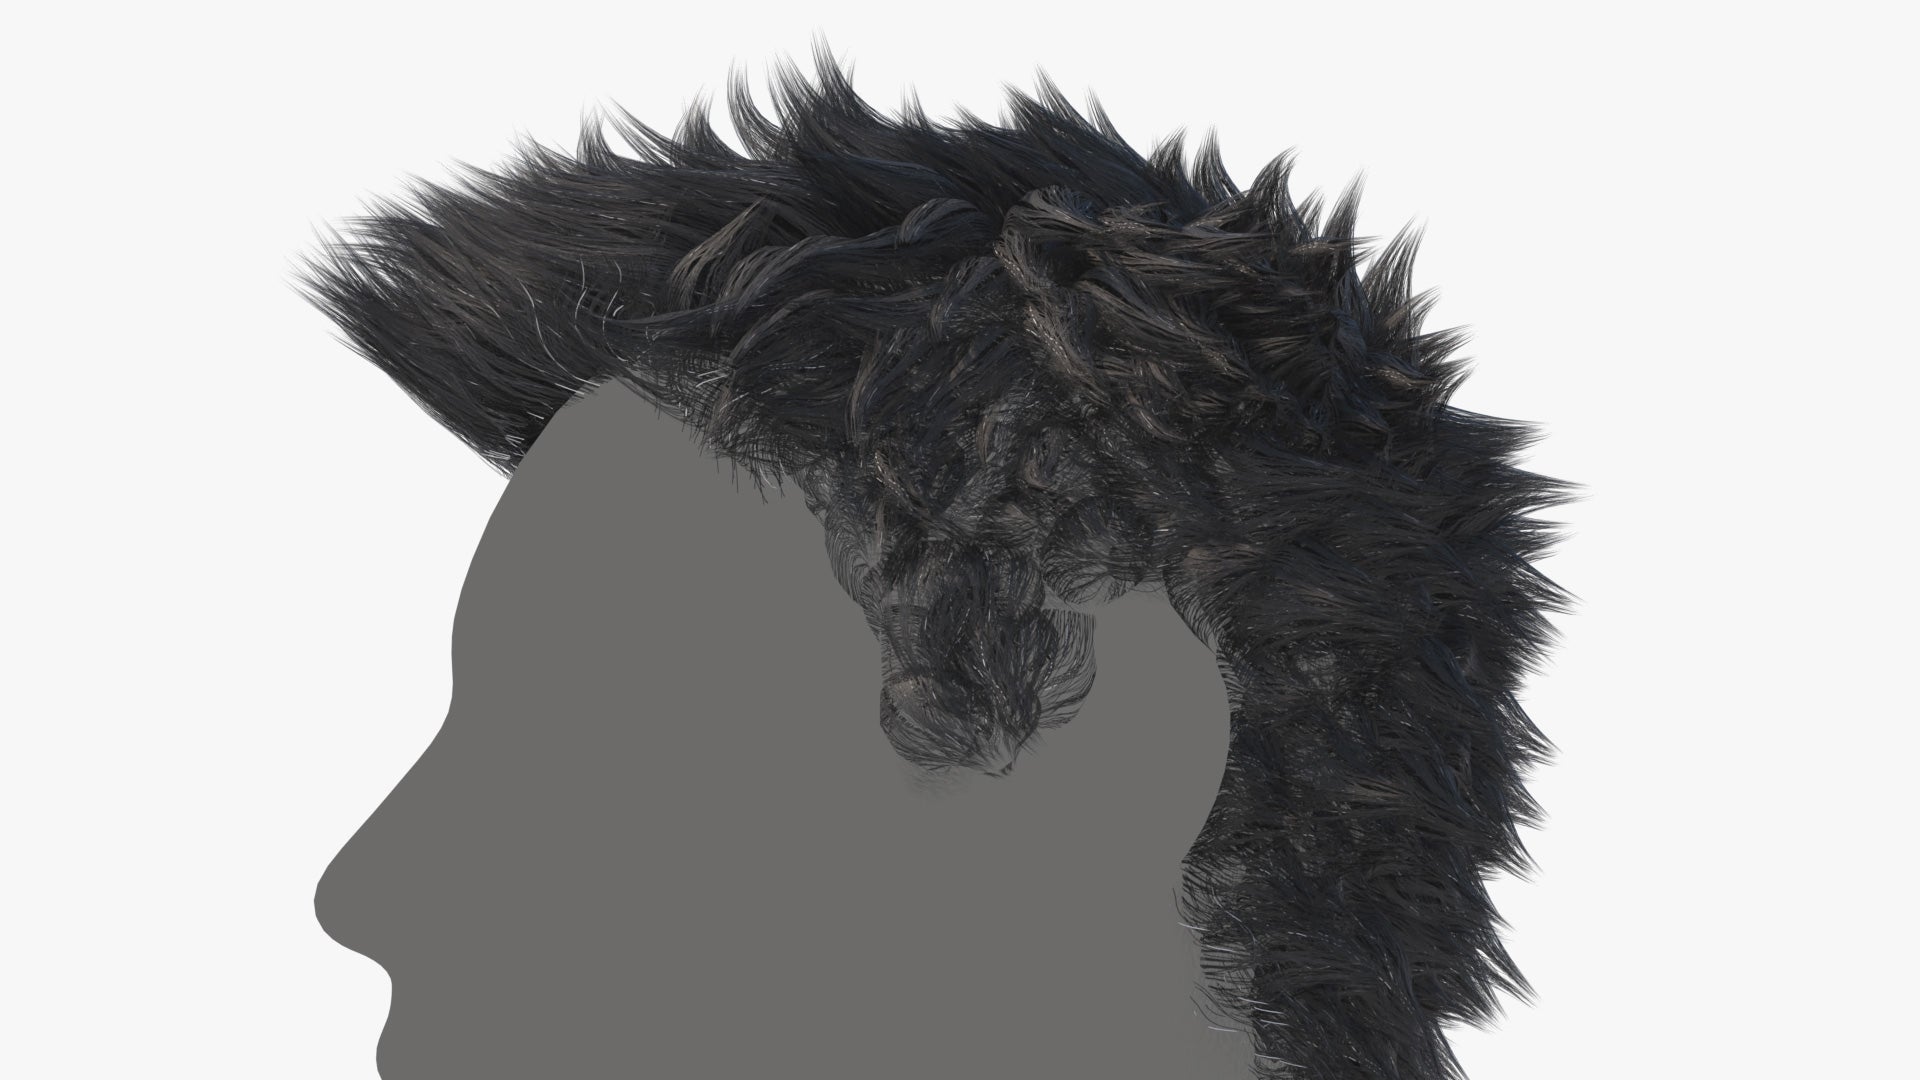 A 3d model of hair made of mesh tubes, with a cool short, spikey, messy style as seen from the side